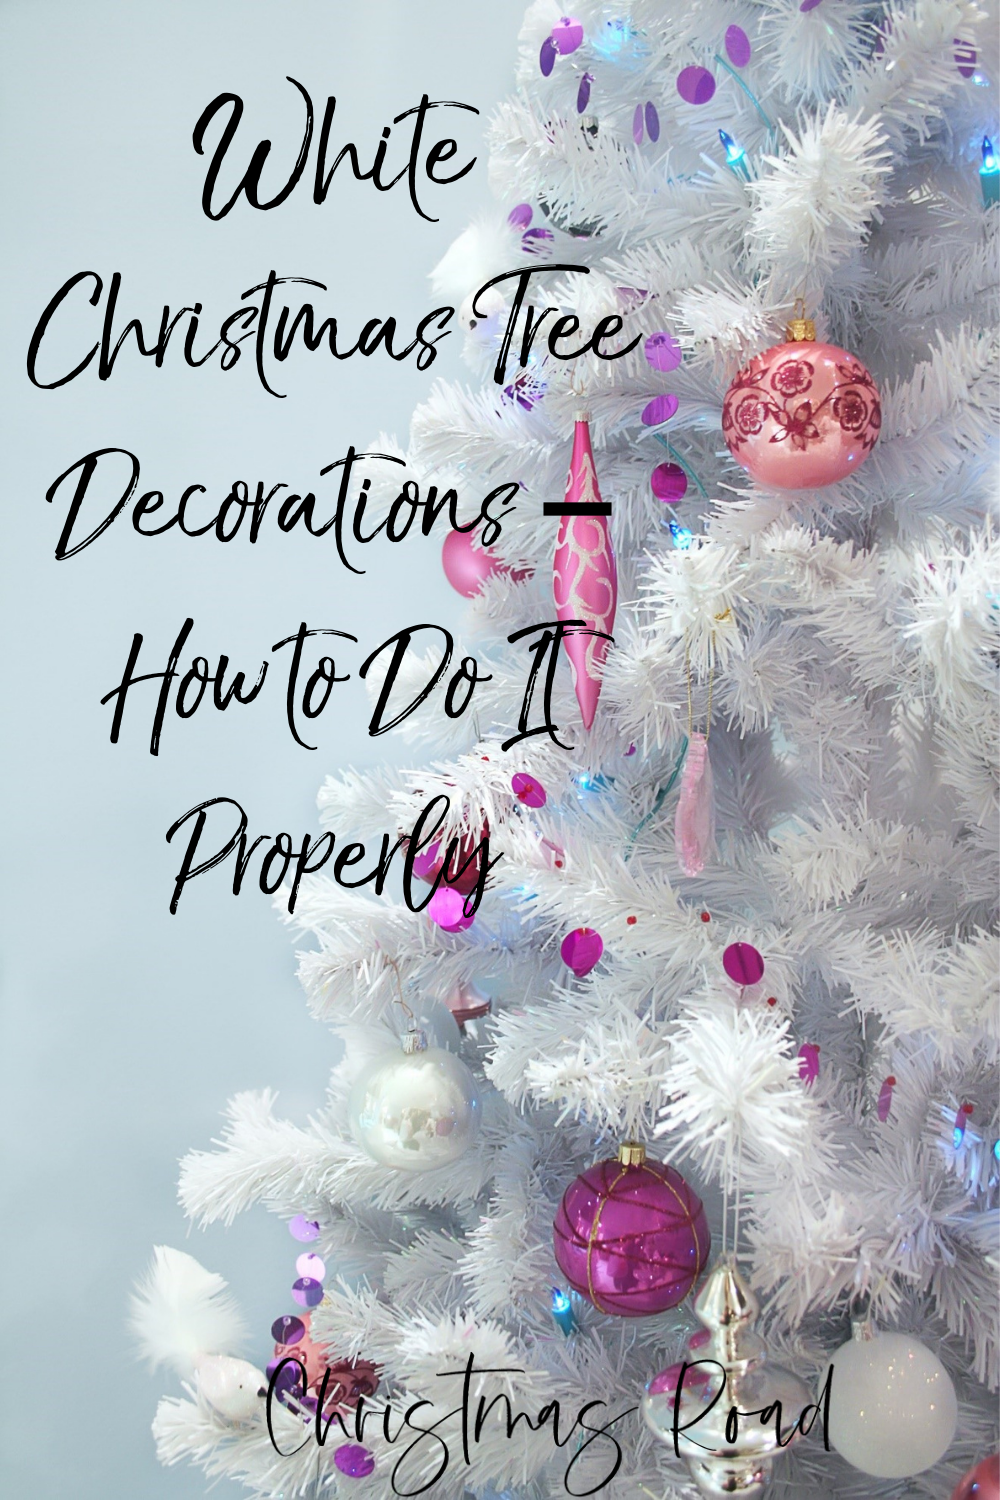 White Christmas Tree Decorations – How to Do It Properly